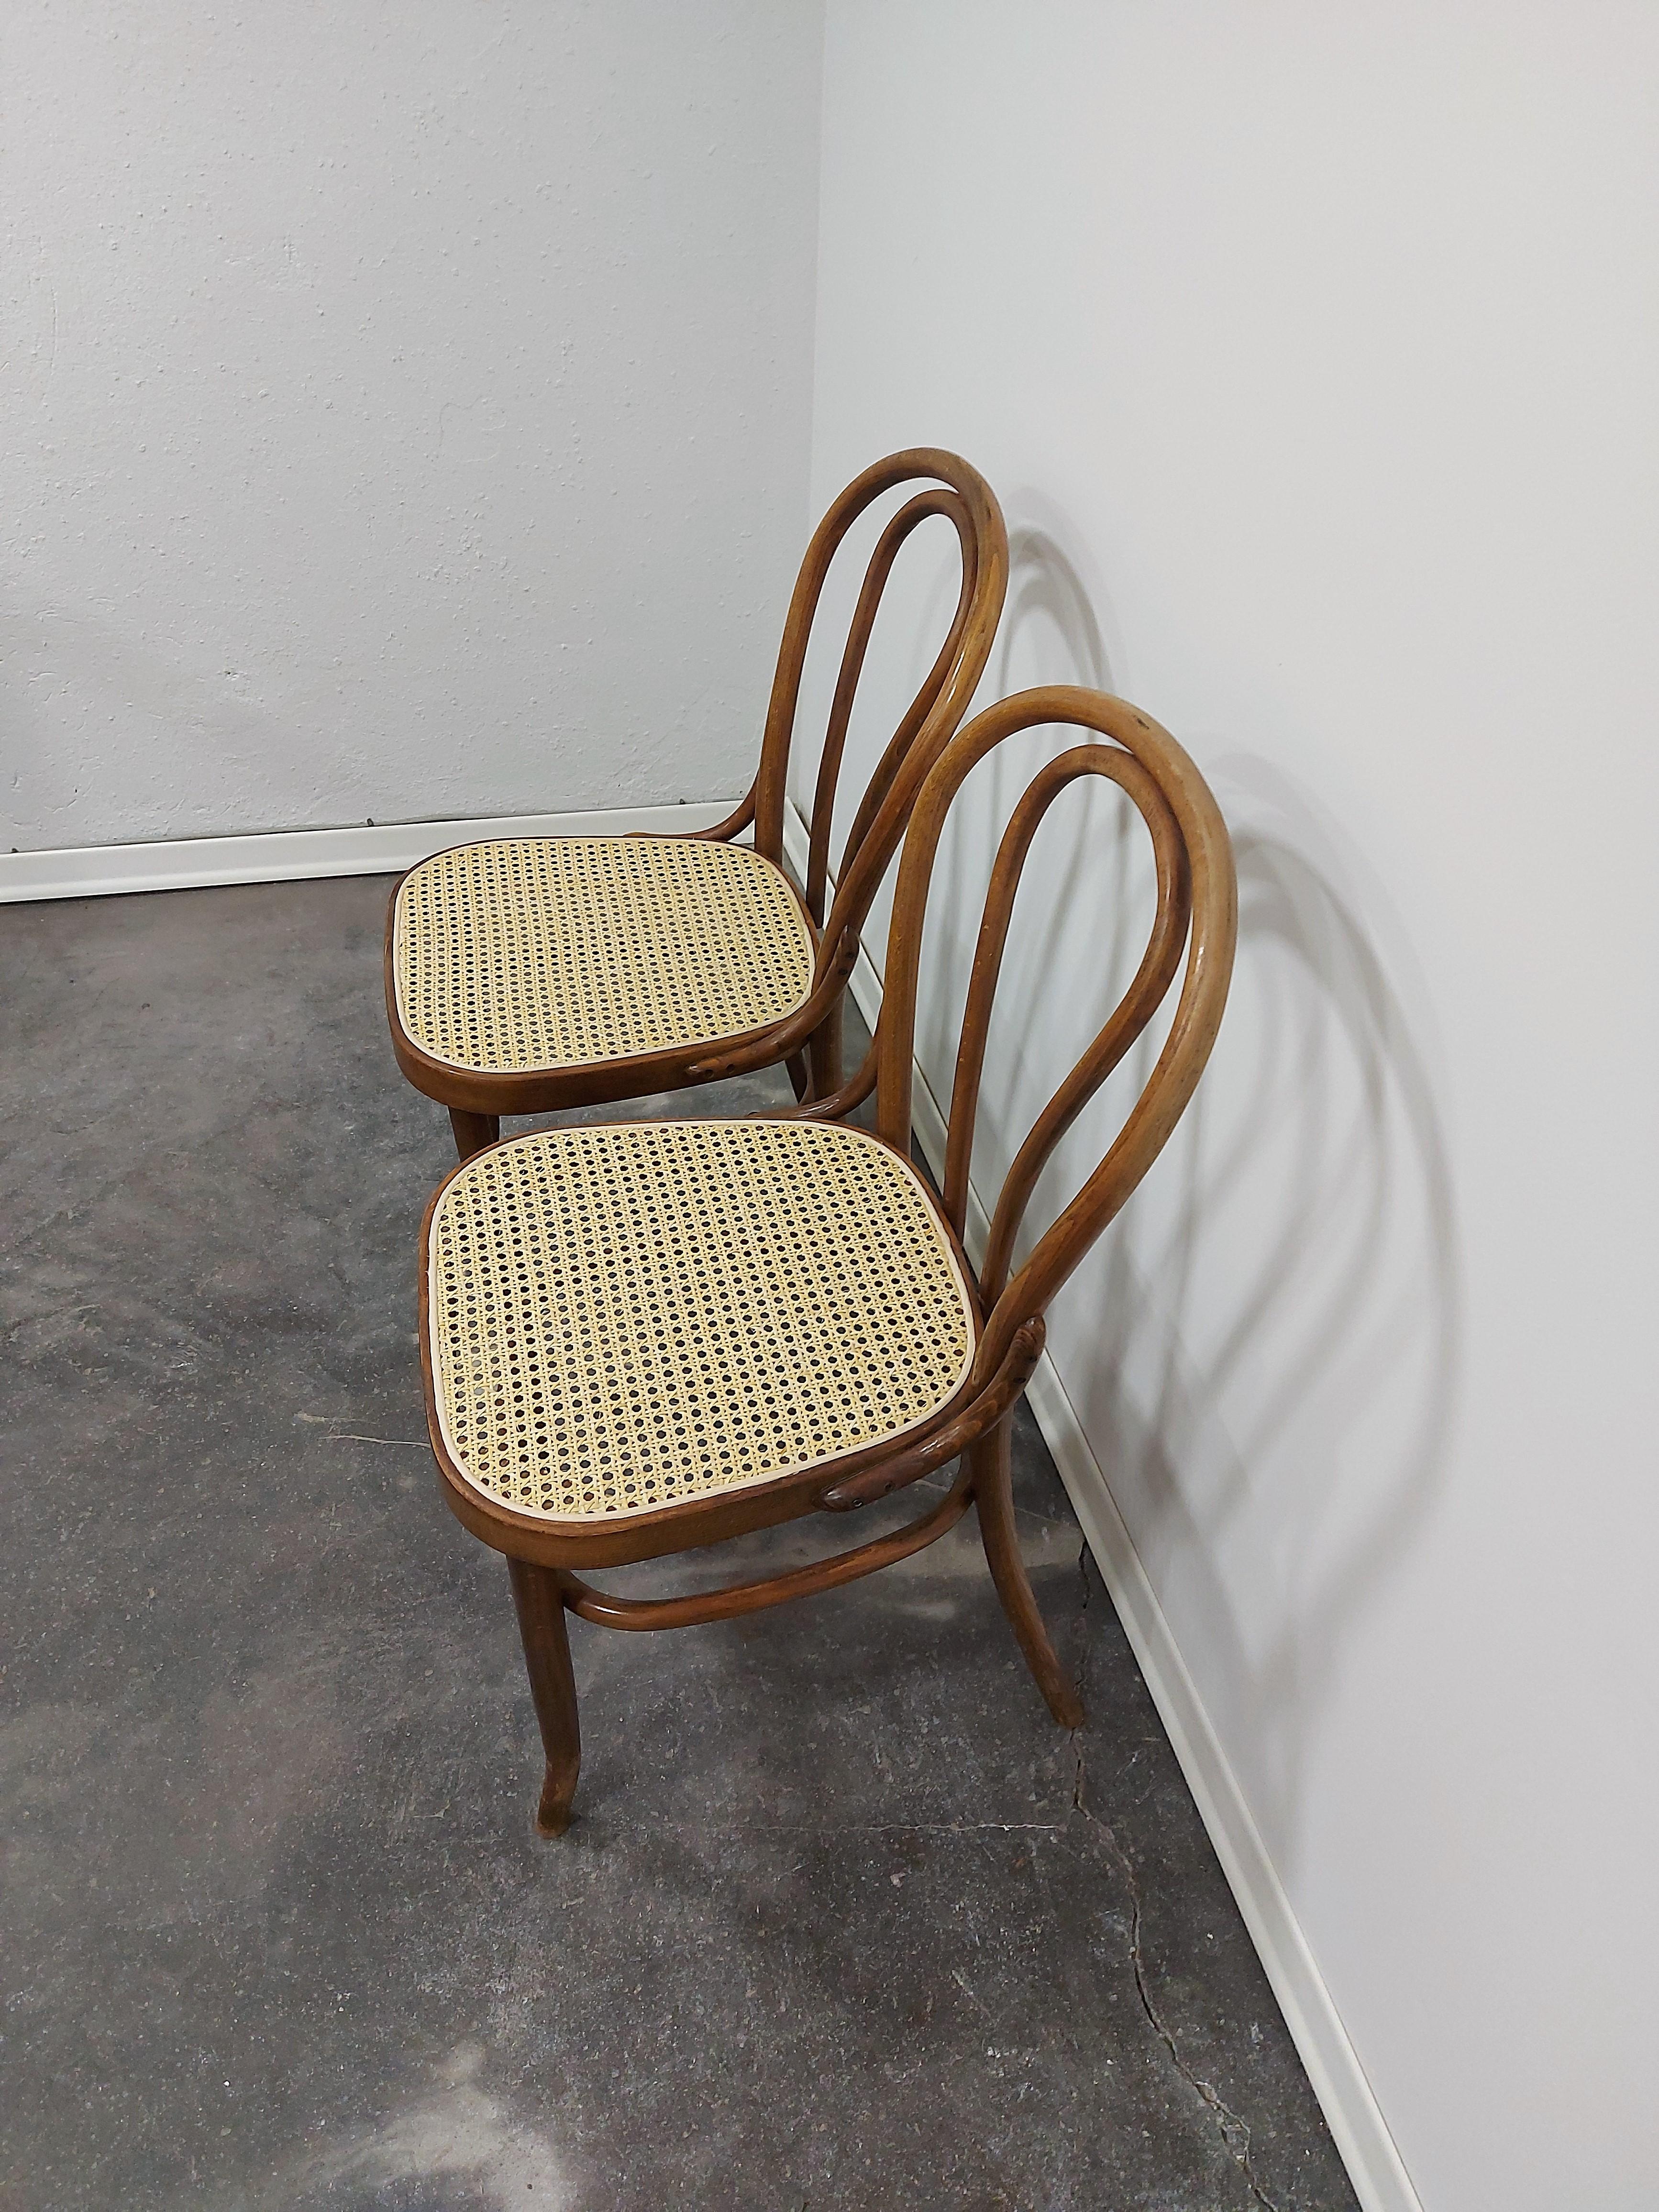 Slovenian Chair, Bentwood 1960s, 1 of 3 For Sale